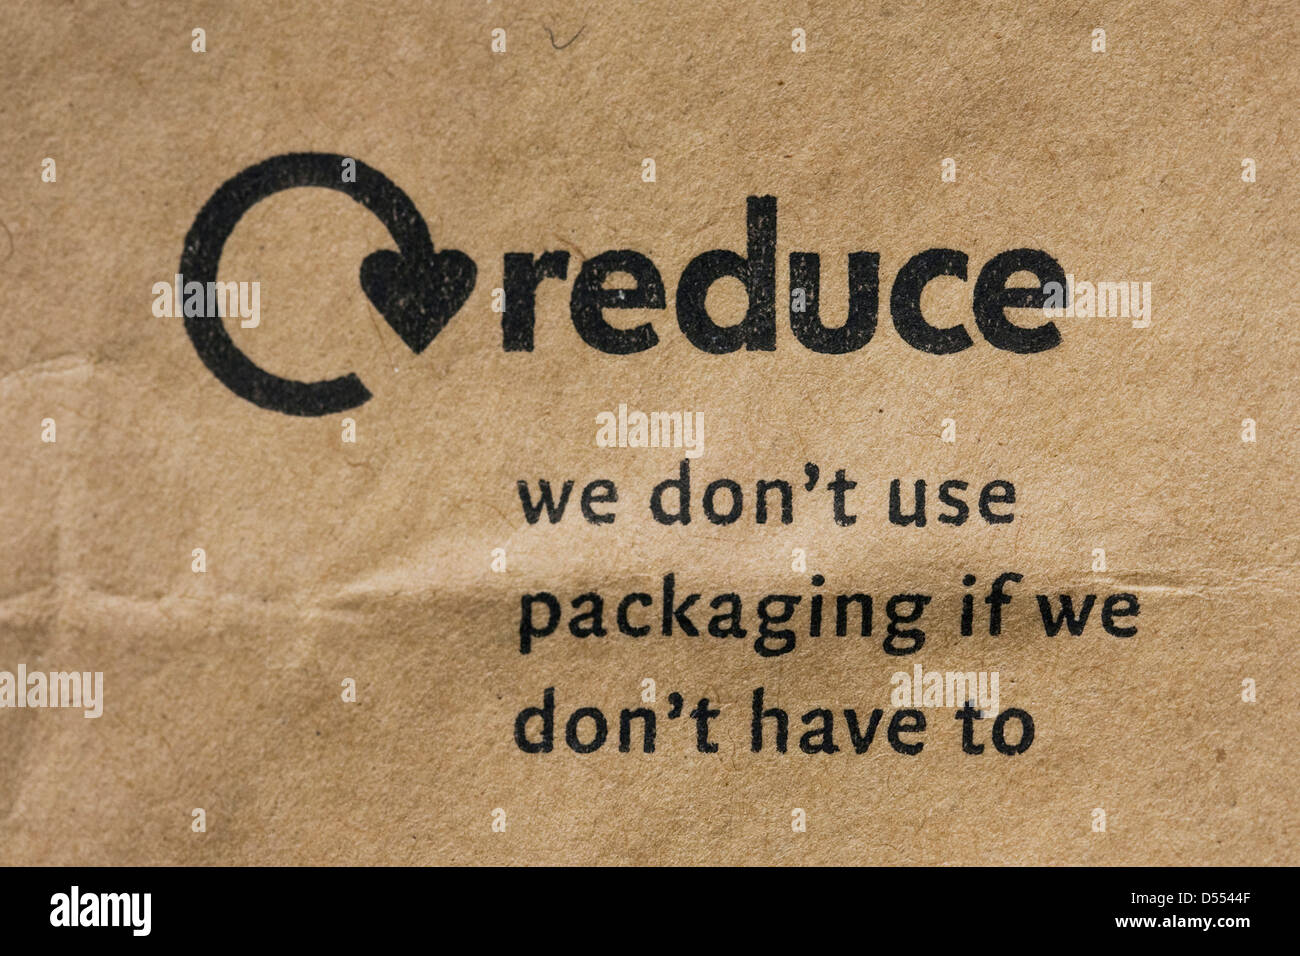 Reduce logo on a brown paper bag. Stock Photo